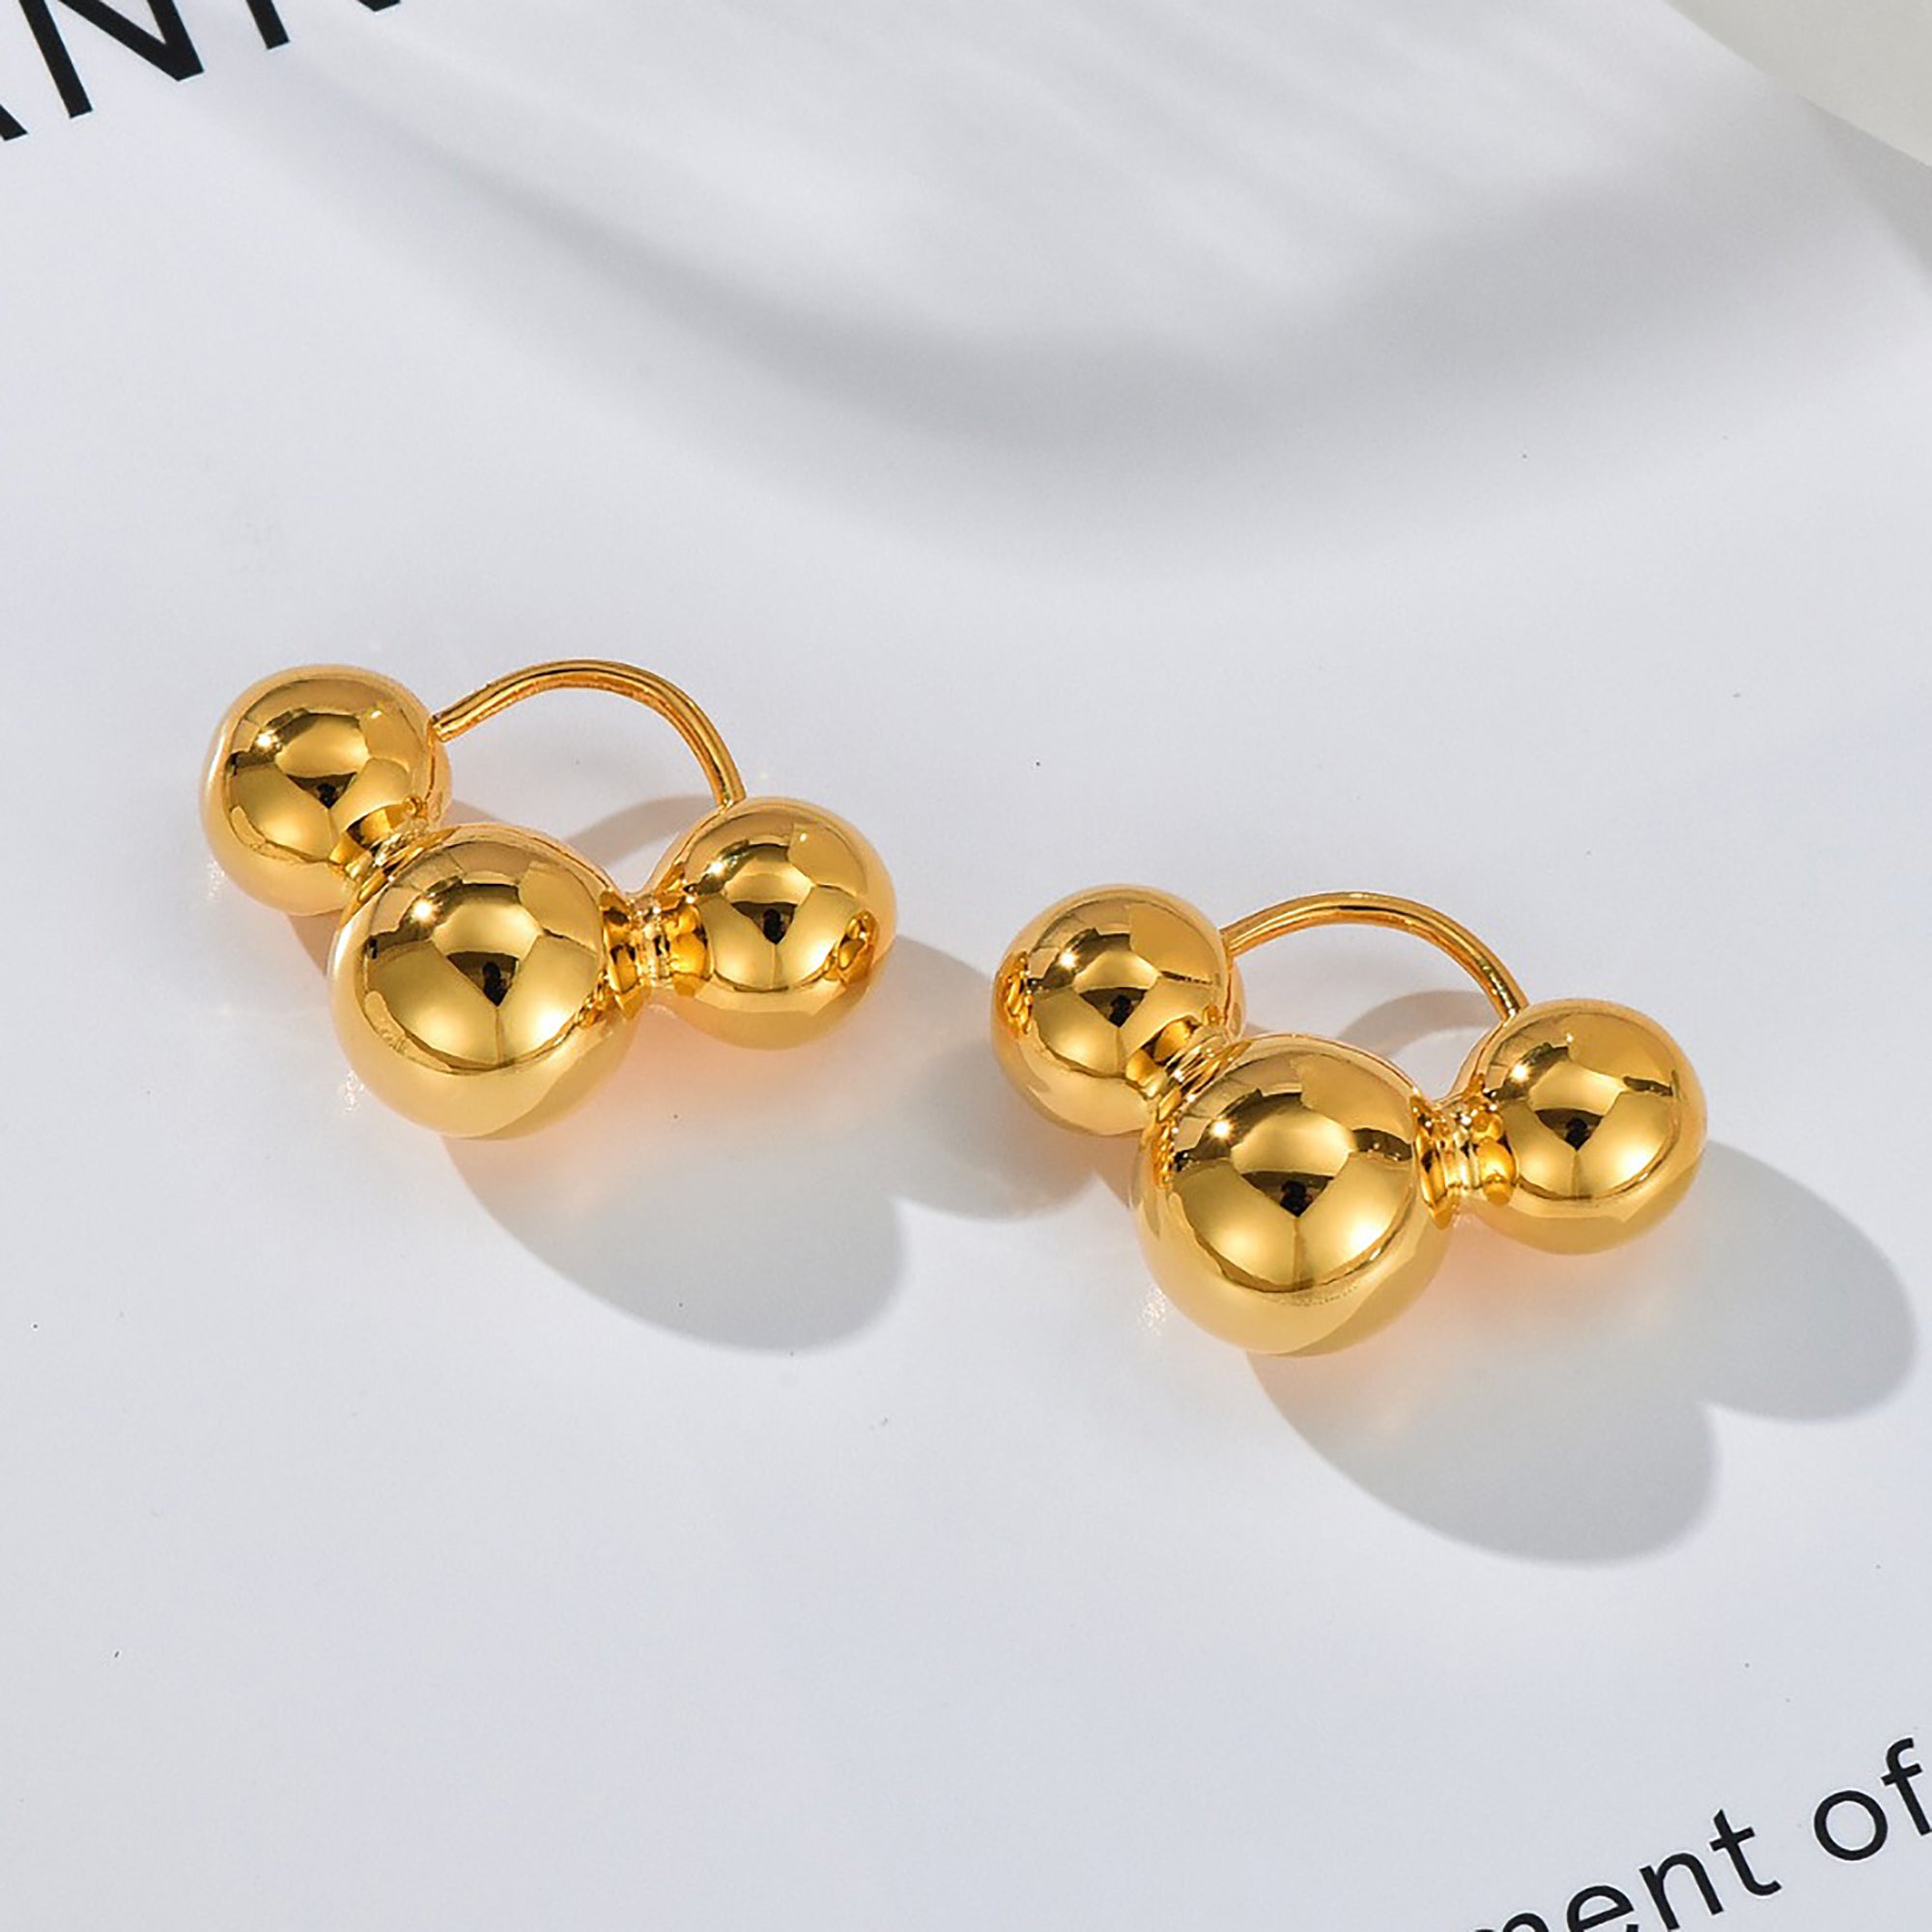 Gold Plated Metal Ball Hoop Earrings Valentine Day Gift